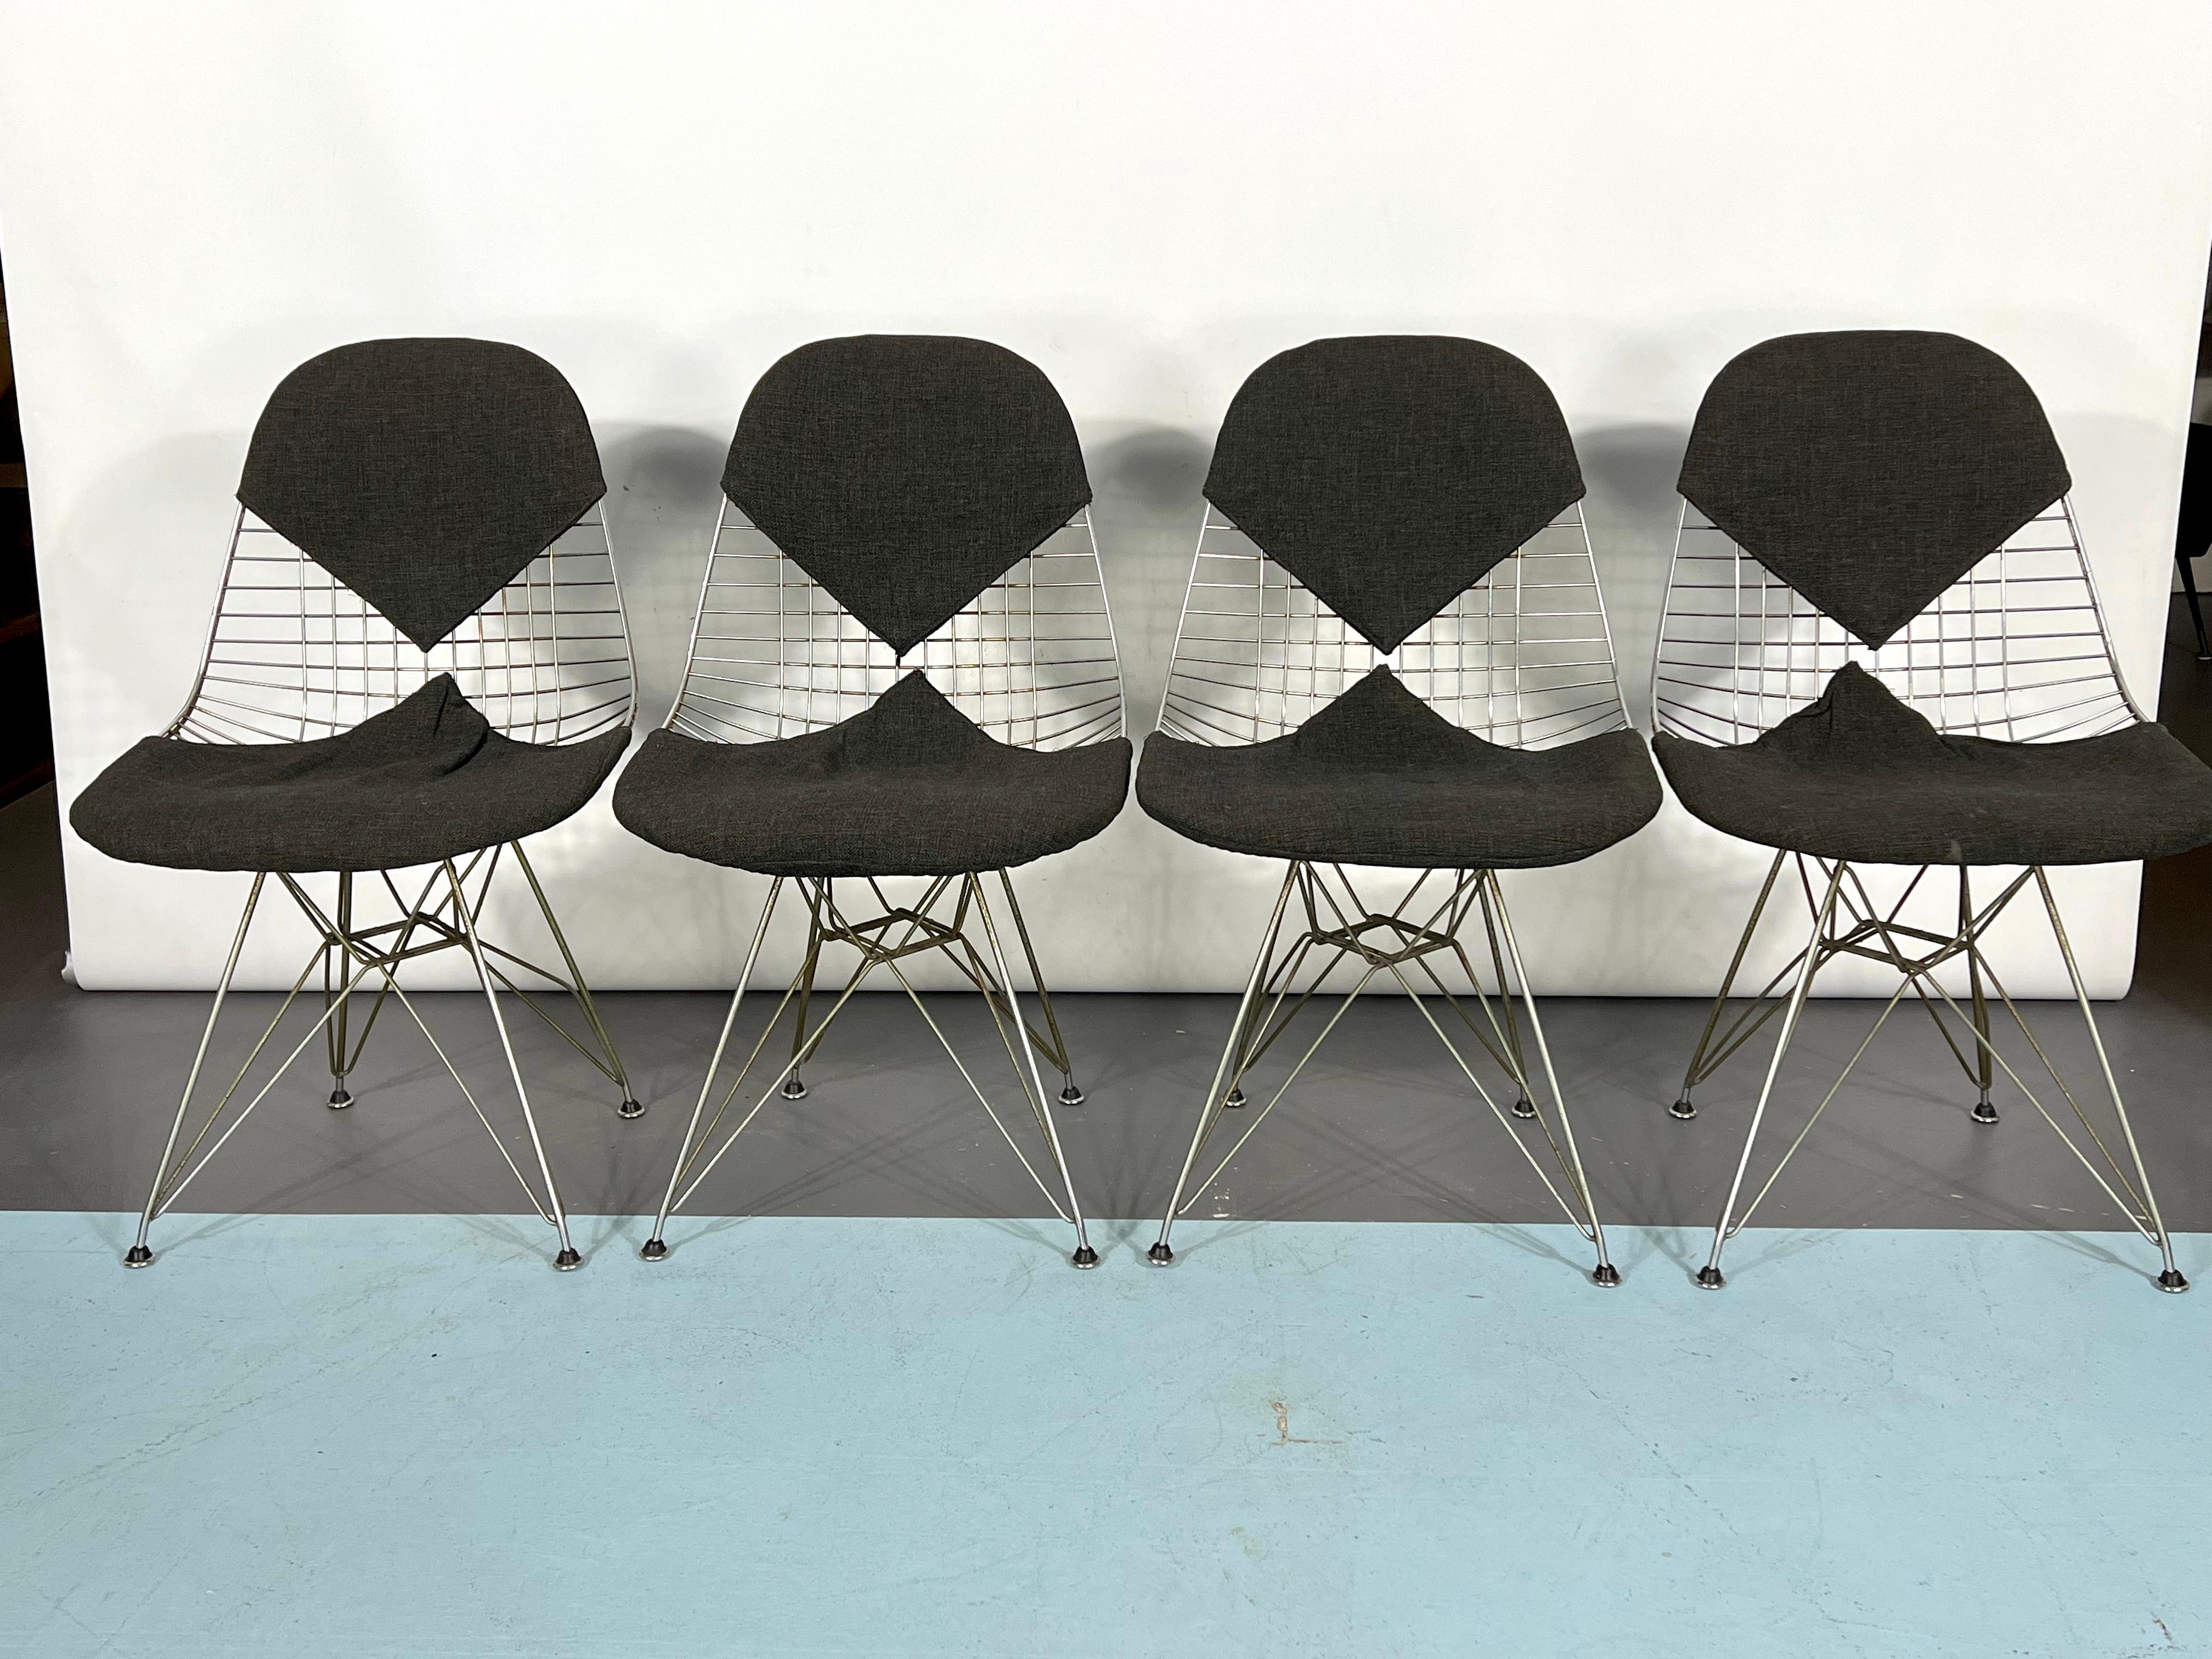 Good vintage condition with trace of age and use for this set of four Bikini chairs designed by Charles and Ray Eames for Herman Miller. Some rust spots on the metal. Original from 60s.